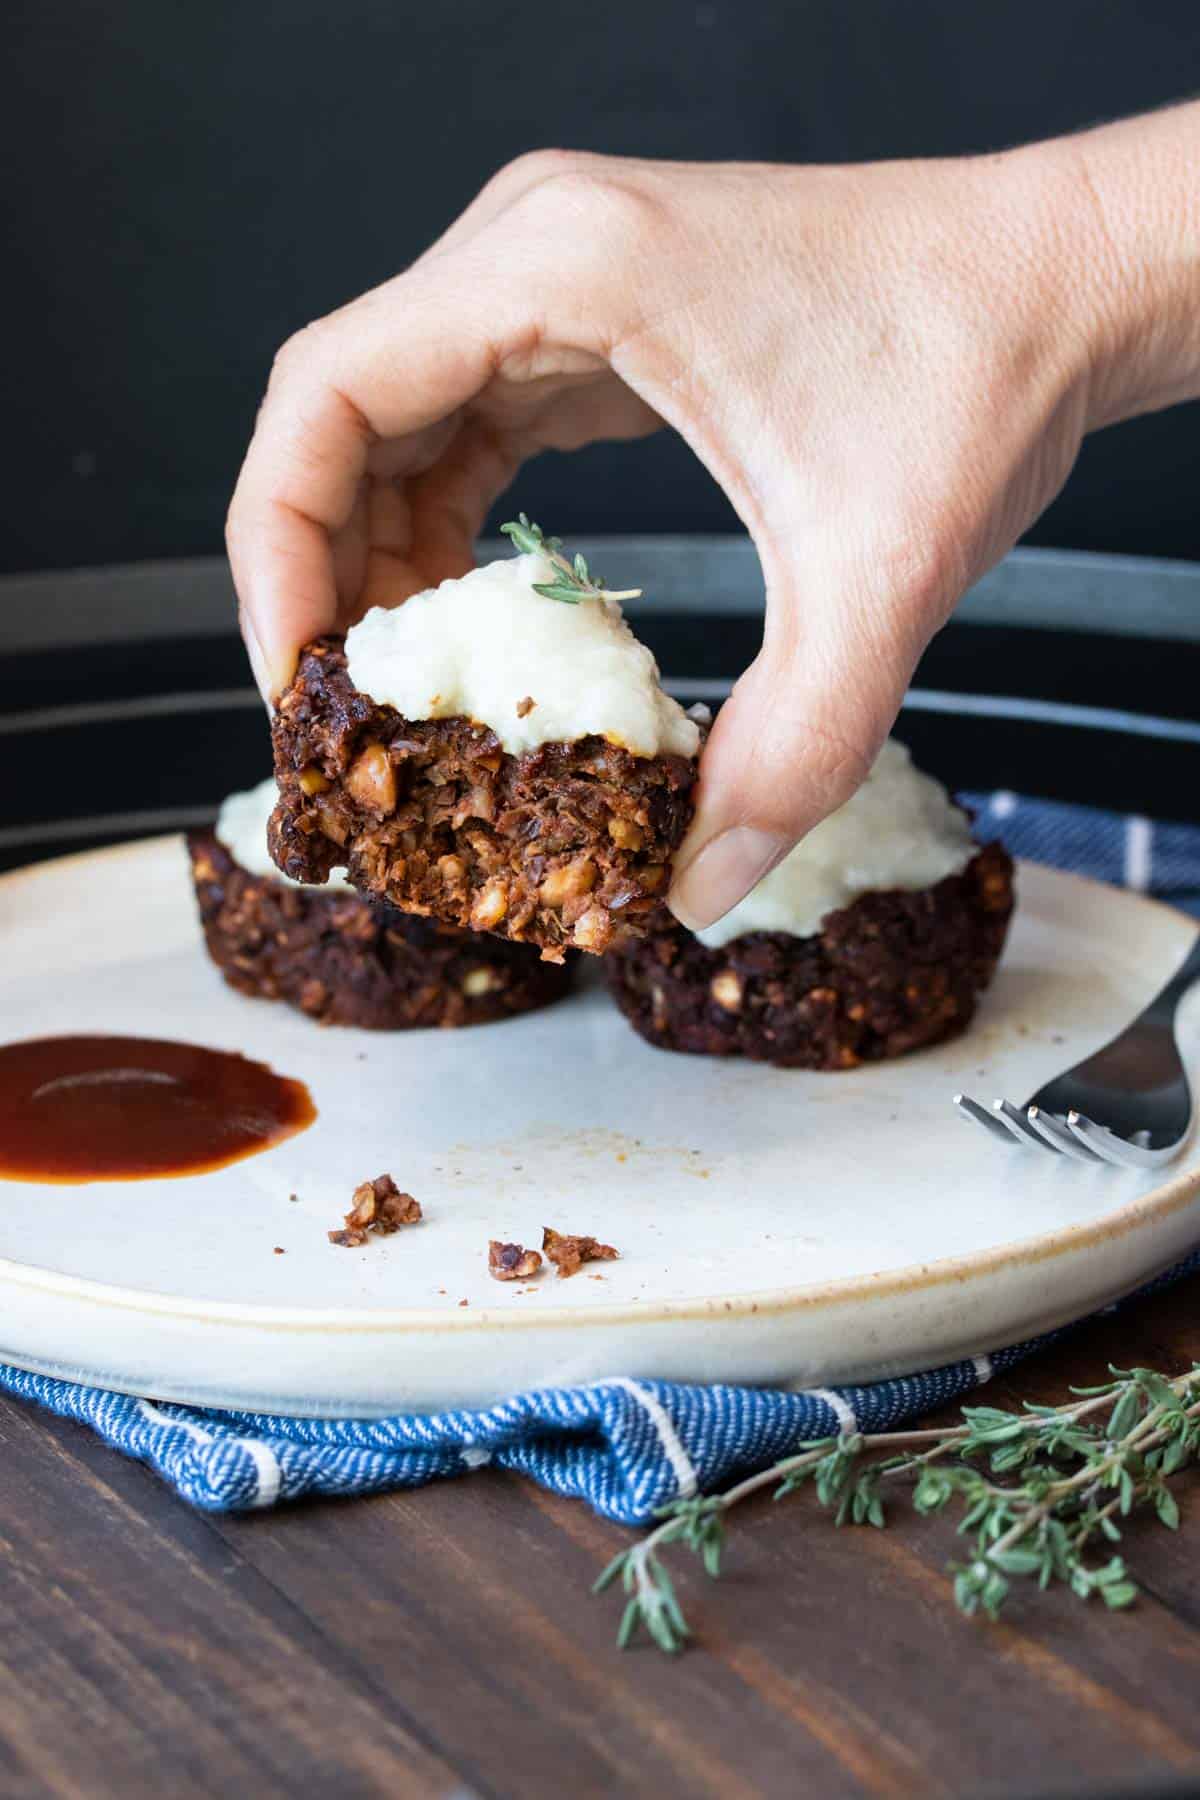 Lentil meatloaf cups on a plate and a hand picking up one.